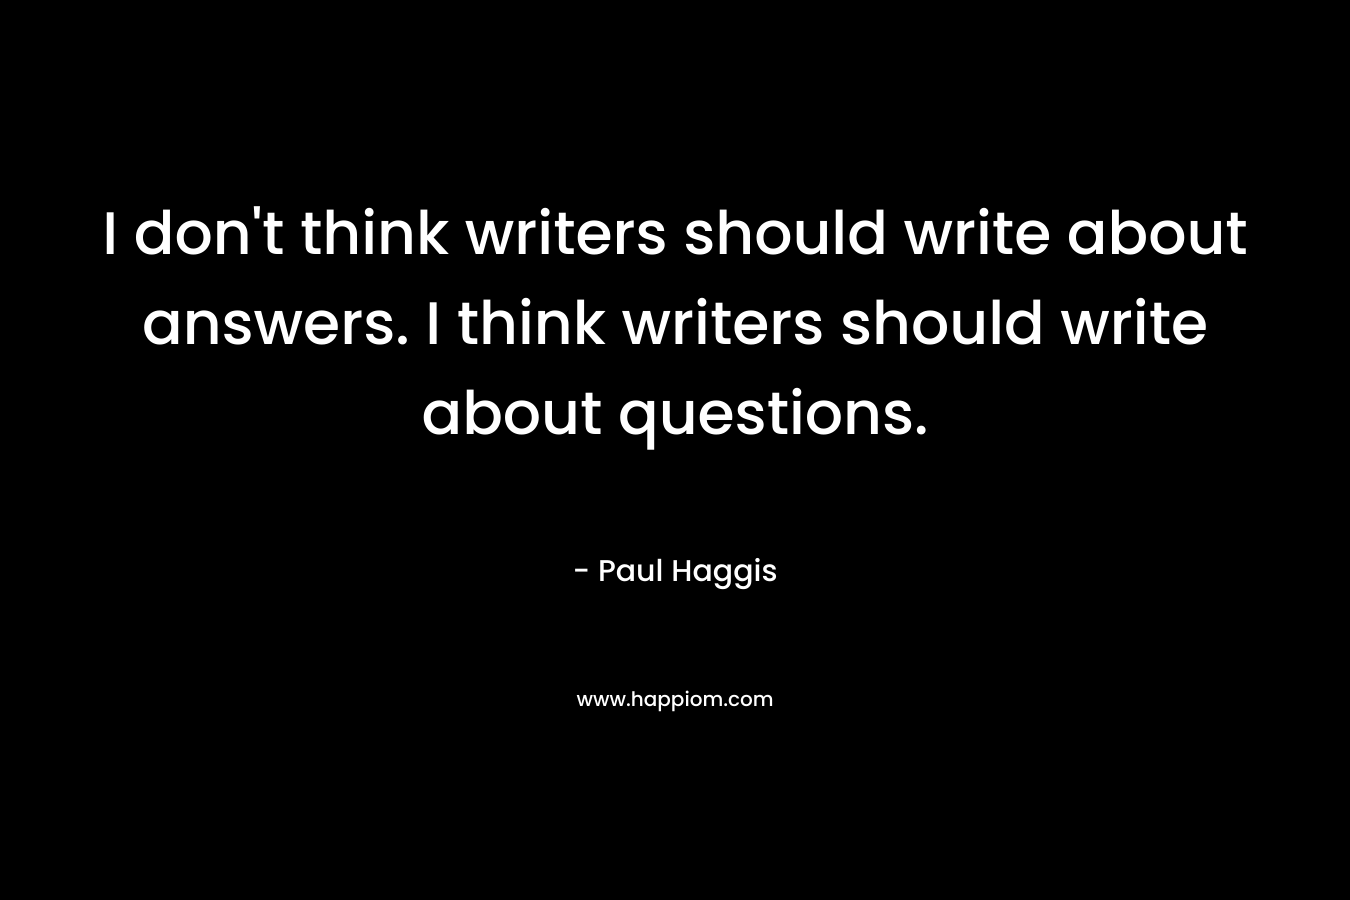 I don’t think writers should write about answers. I think writers should write about questions. – Paul Haggis